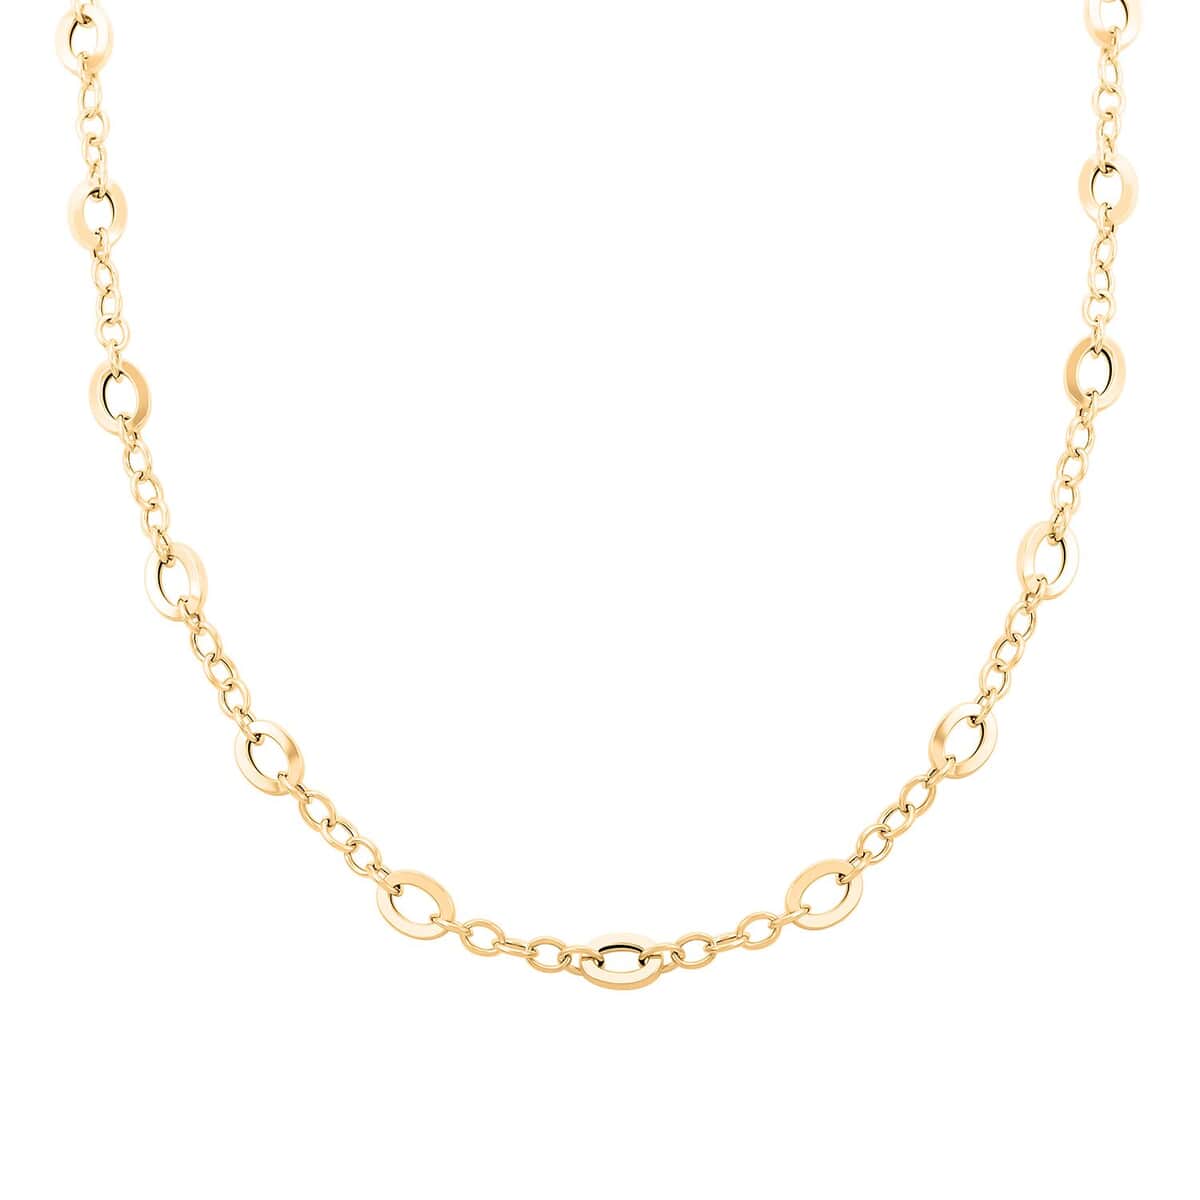 Preziosa Italian 14K Yellow Gold Chain Necklace 18-20 Inches 4.04 Grams image number 0